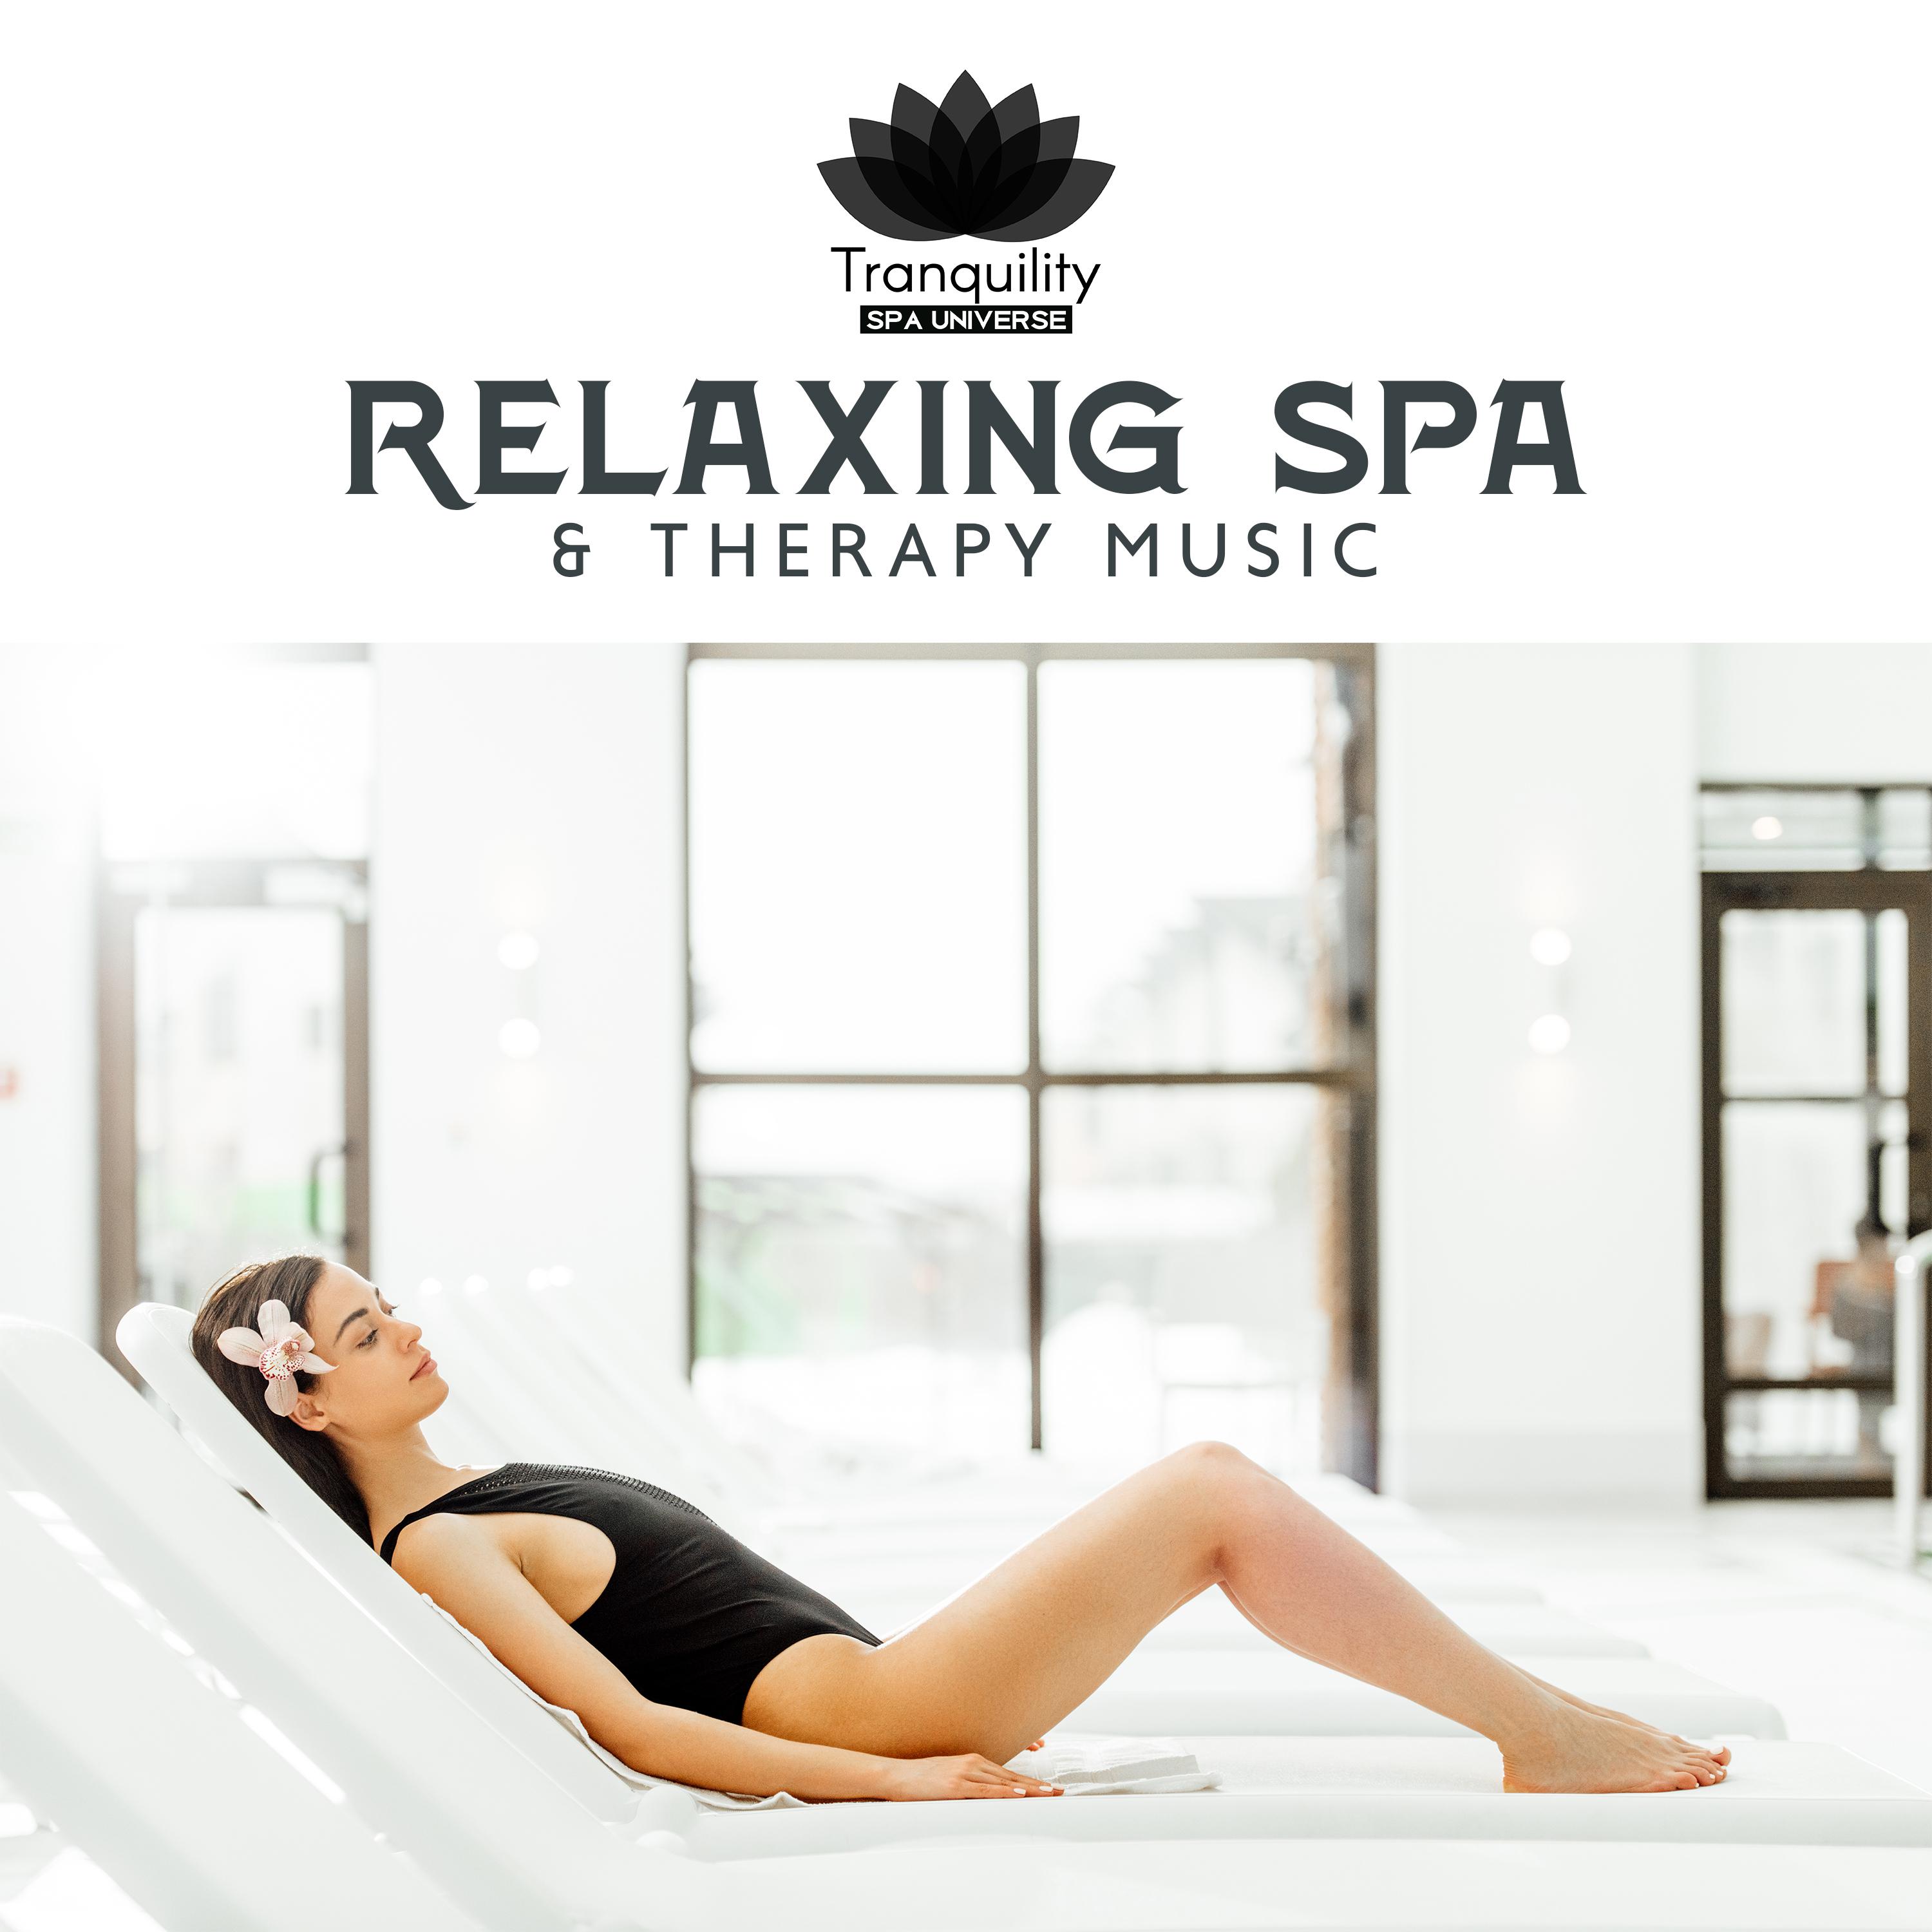 Relaxing Spa & Therapy Music